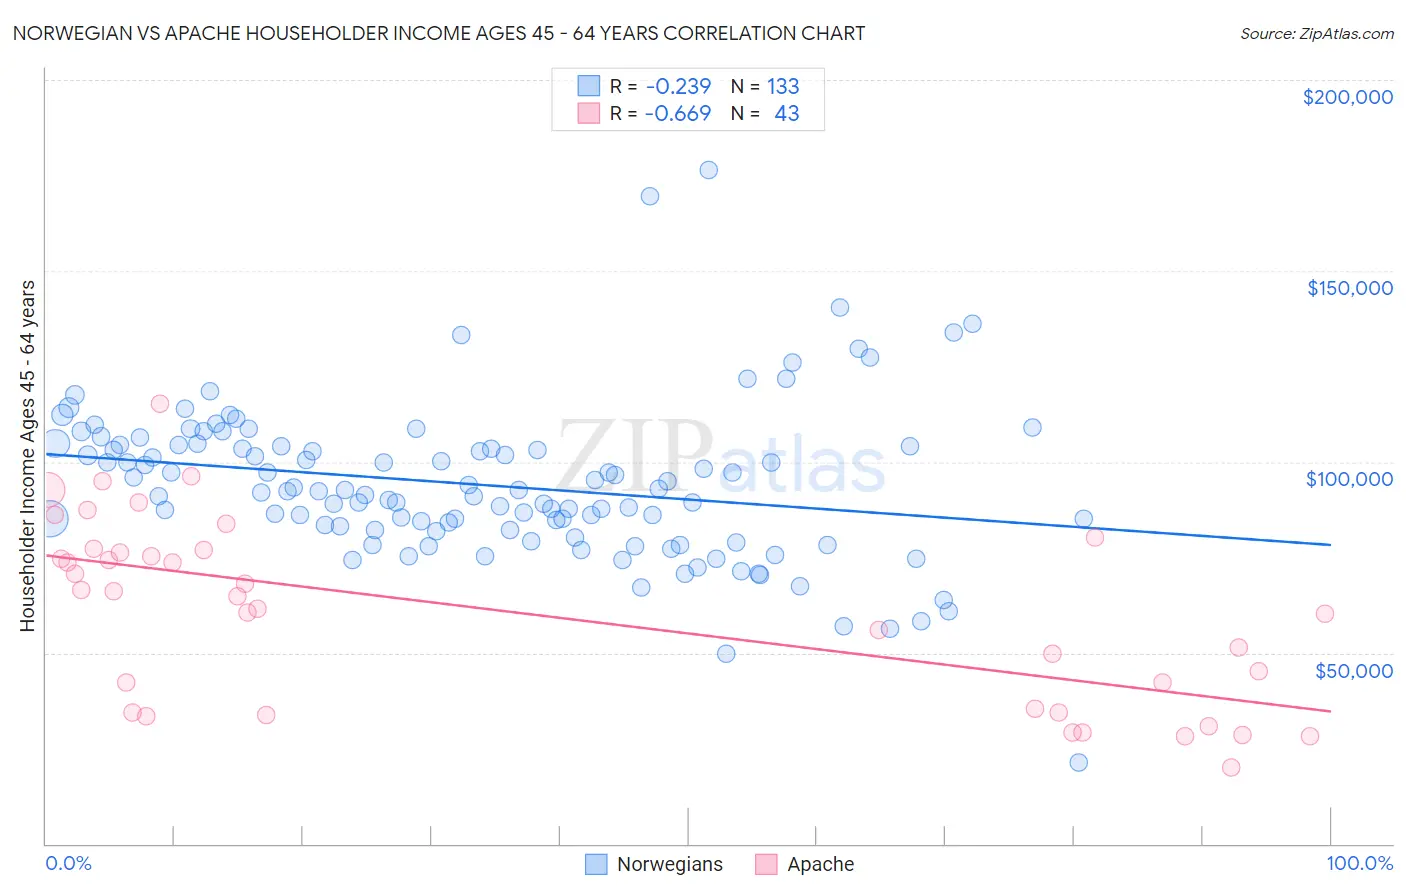 Norwegian vs Apache Householder Income Ages 45 - 64 years